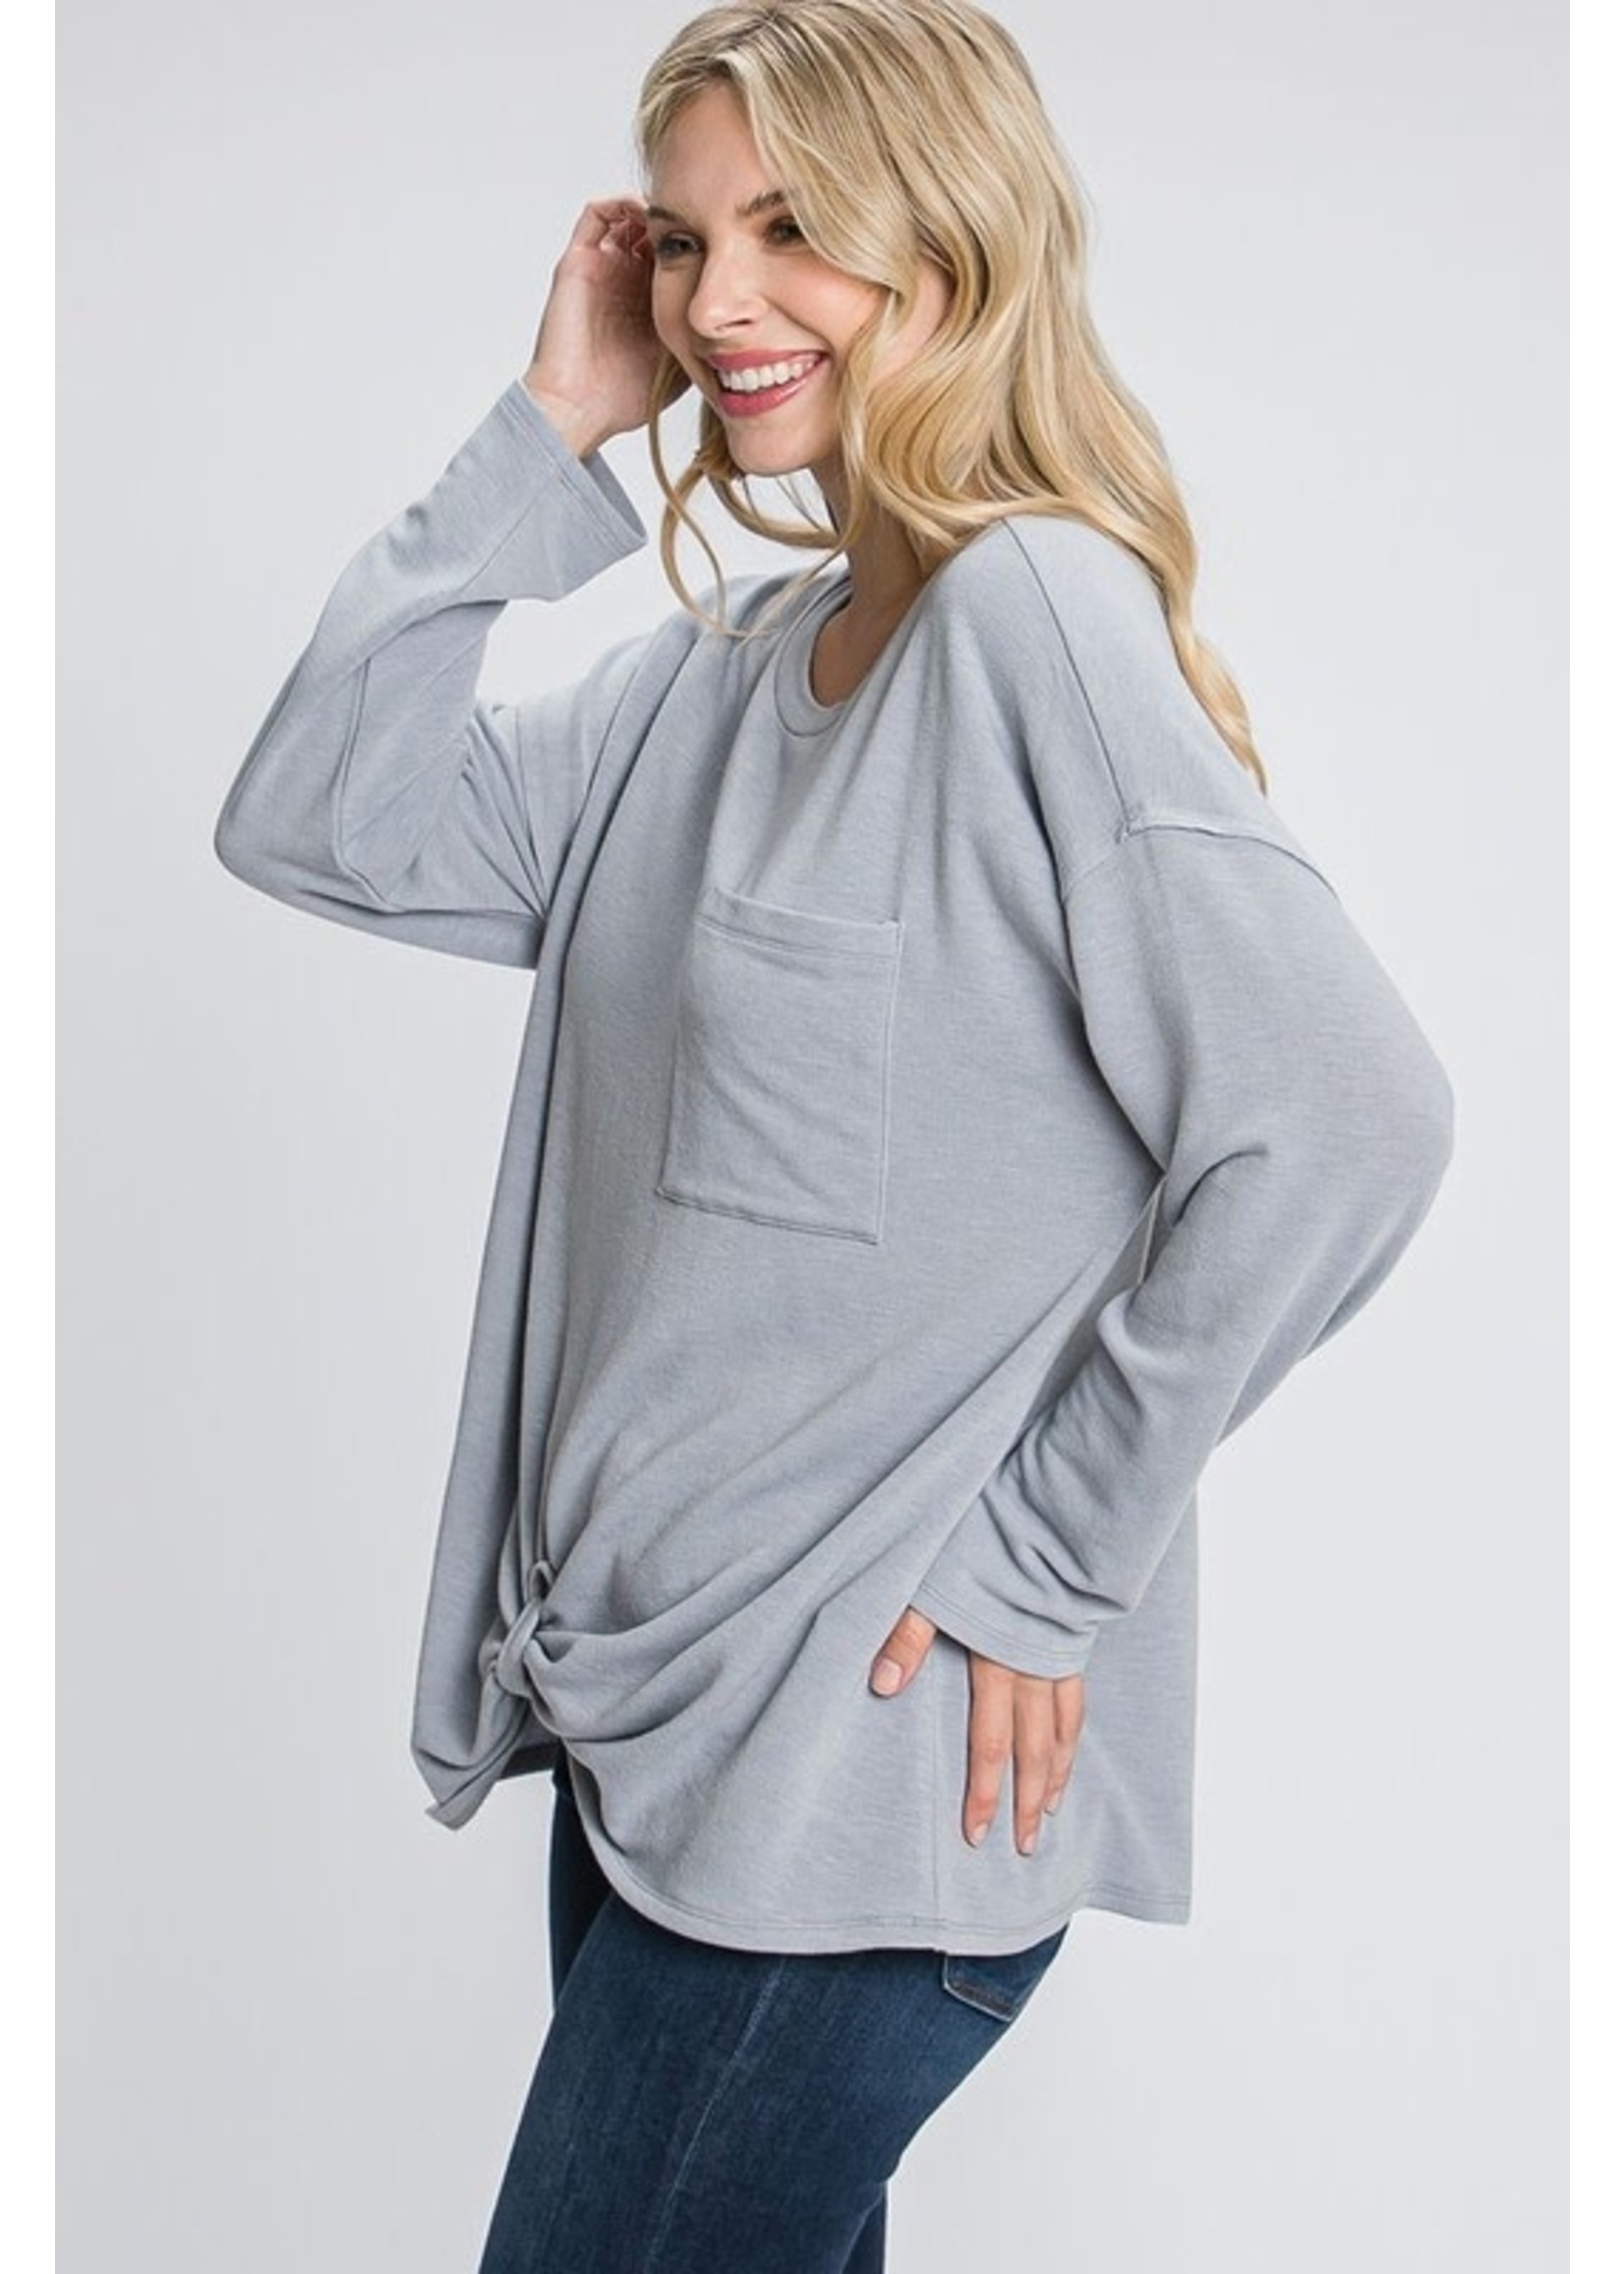 Long Sleeve Top w/ Front Knot Detail in Grey